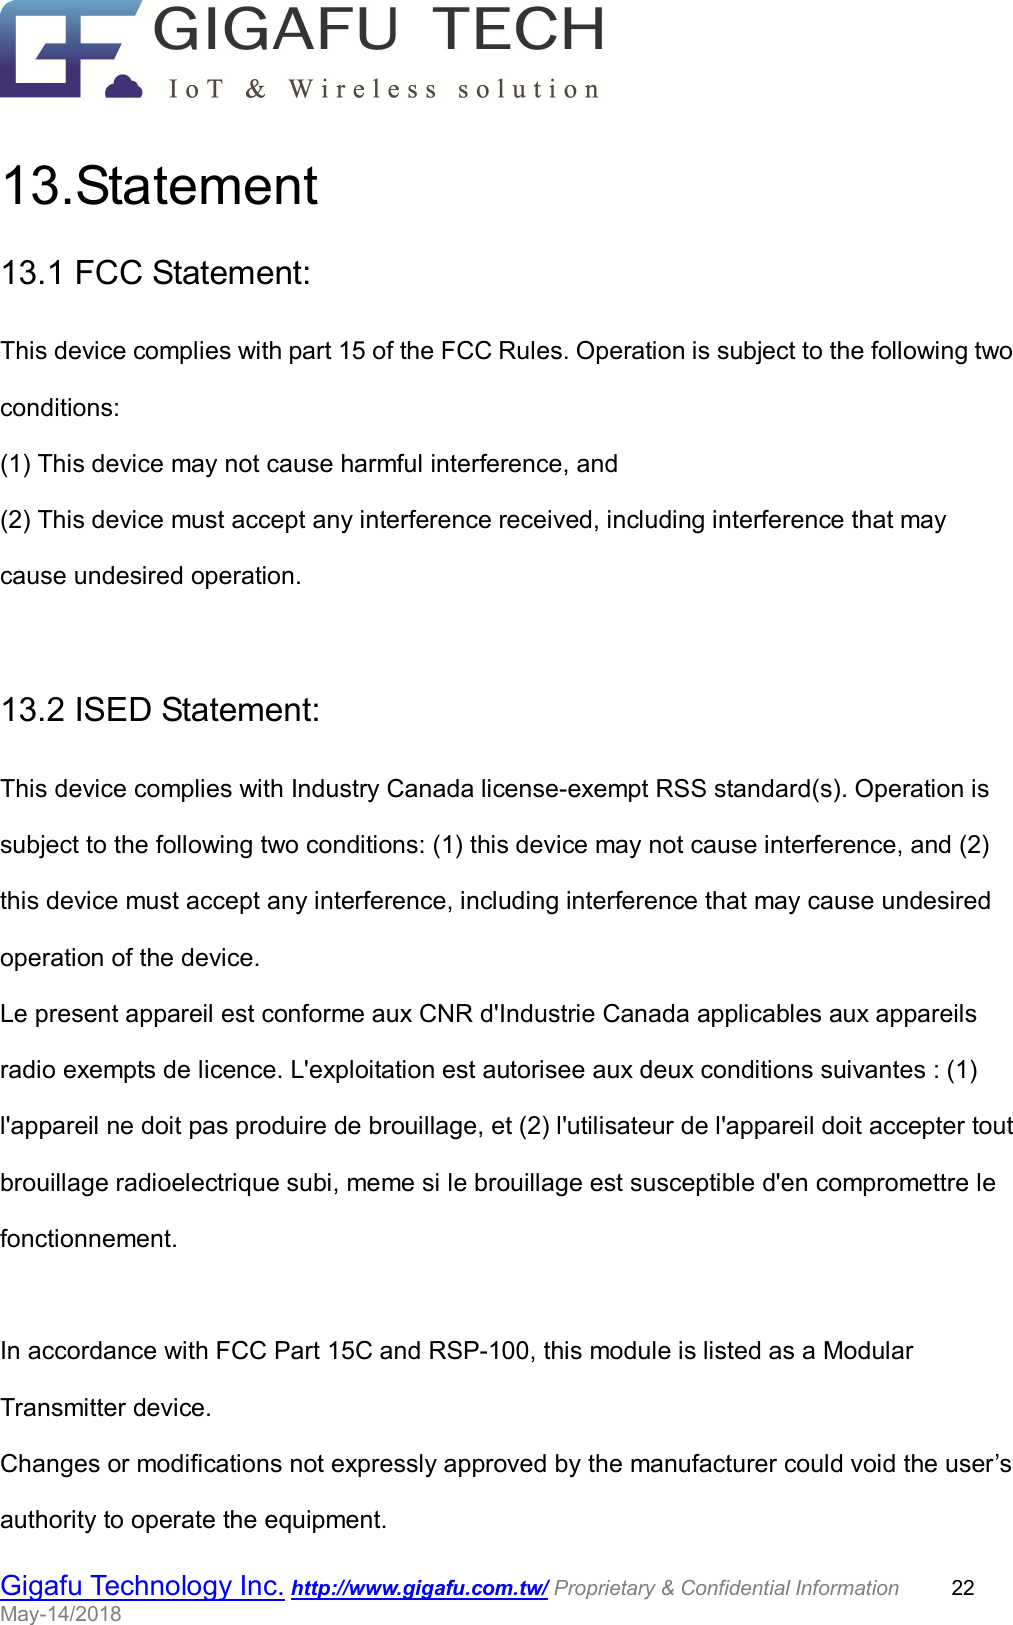                                                  Gigafu Technology Inc. http://www.gigafu.com.tw/ Proprietary &amp; Confidential Information          22 May-14/2018    13.Statement 13.1 FCC Statement: This device complies with part 15 of the FCC Rules. Operation is subject to the following two conditions:   (1) This device may not cause harmful interference, and (2) This device must accept any interference received, including interference that may cause undesired operation.  13.2 ISED Statement: This device complies with Industry Canada license-exempt RSS standard(s). Operation is subject to the following two conditions: (1) this device may not cause interference, and (2) this device must accept any interference, including interference that may cause undesired operation of the device. Le present appareil est conforme aux CNR d&apos;Industrie Canada applicables aux appareils radio exempts de licence. L&apos;exploitation est autorisee aux deux conditions suivantes : (1) l&apos;appareil ne doit pas produire de brouillage, et (2) l&apos;utilisateur de l&apos;appareil doit accepter tout brouillage radioelectrique subi, meme si le brouillage est susceptible d&apos;en compromettre le fonctionnement.  In accordance with FCC Part 15C and RSP-100, this module is listed as a Modular Transmitter device. Changes or modifications not expressly approved by the manufacturer could void the user’s authority to operate the equipment. 